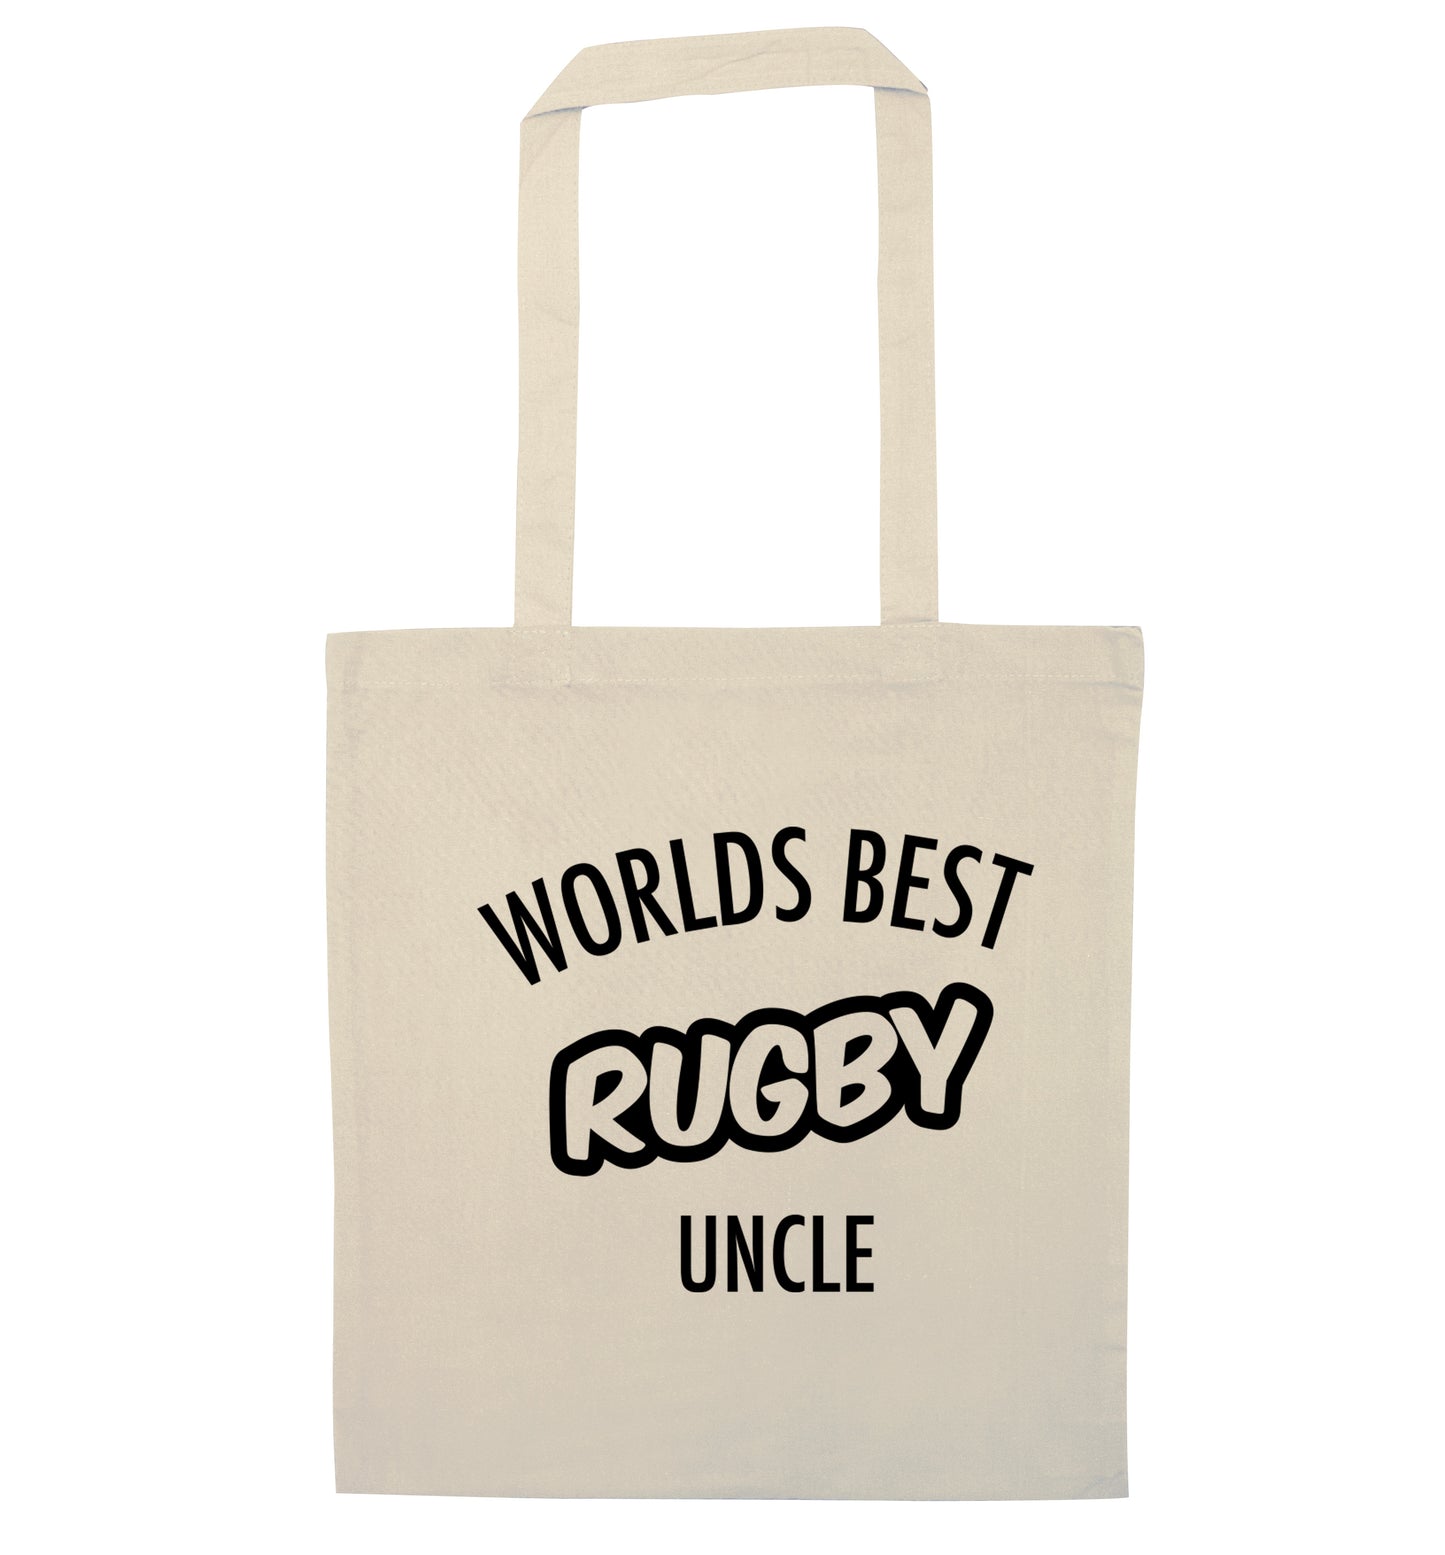 Worlds best rugby uncle natural tote bag